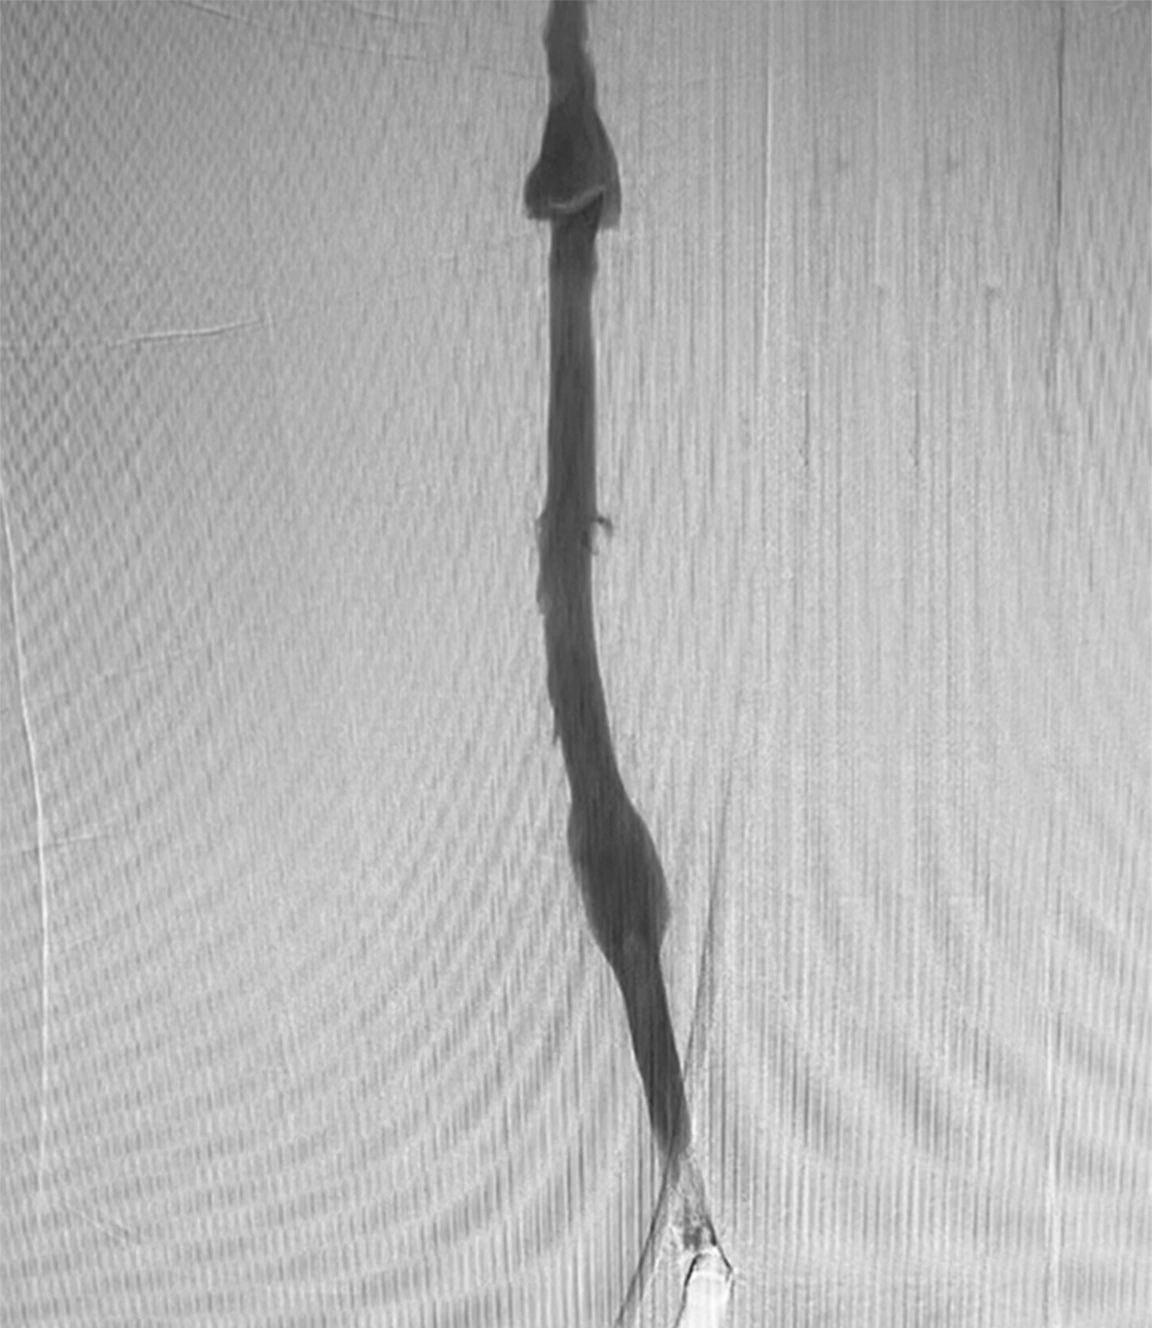 Angiogram of restored blood flow post thrombectomy with Lightning 12